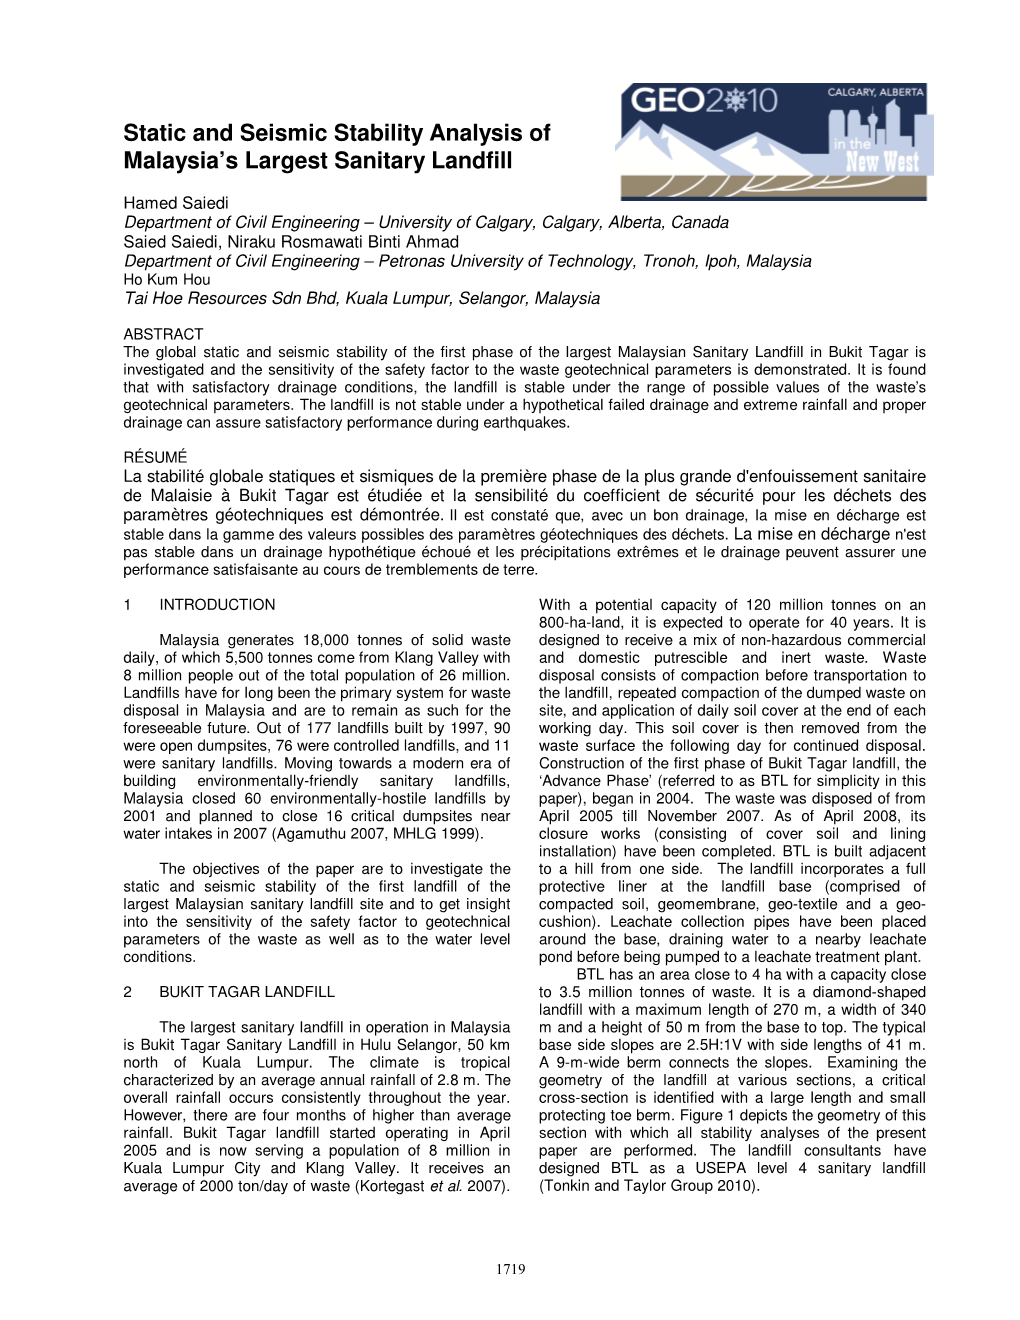 Static and Seismic Stability Analysis of Malaysia's Largest Sanitary Landfill